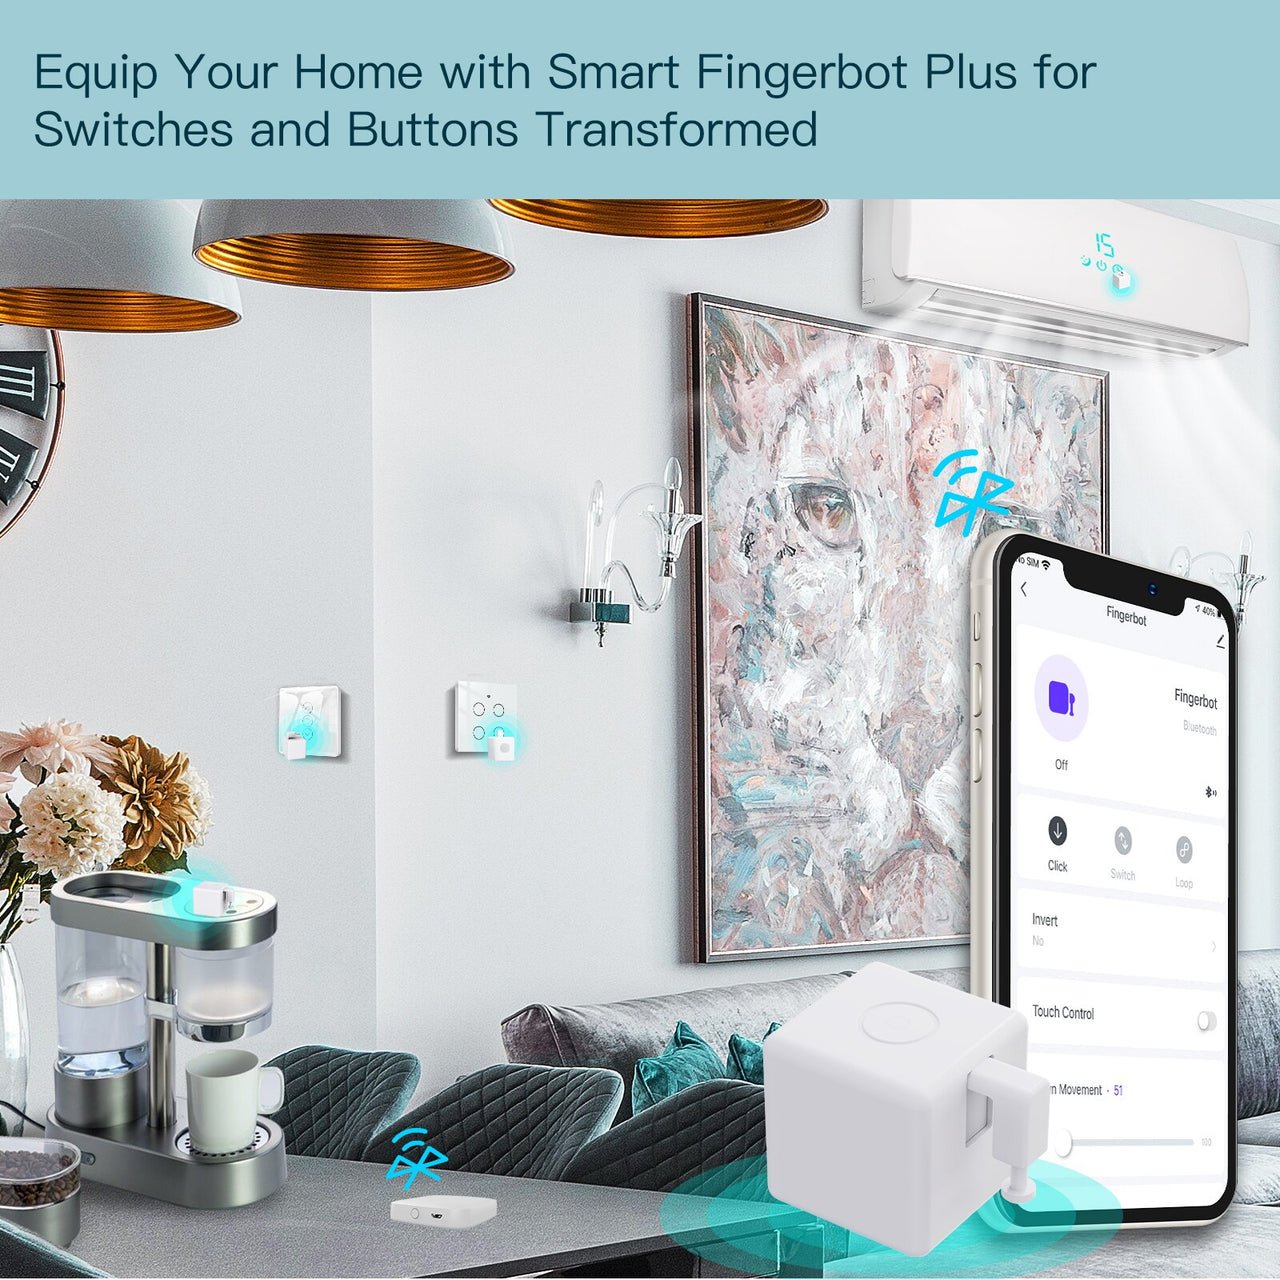 🔥LAST DAY SPECIAL SALE 30% OFF 🔥Smart Fingerbot Switch